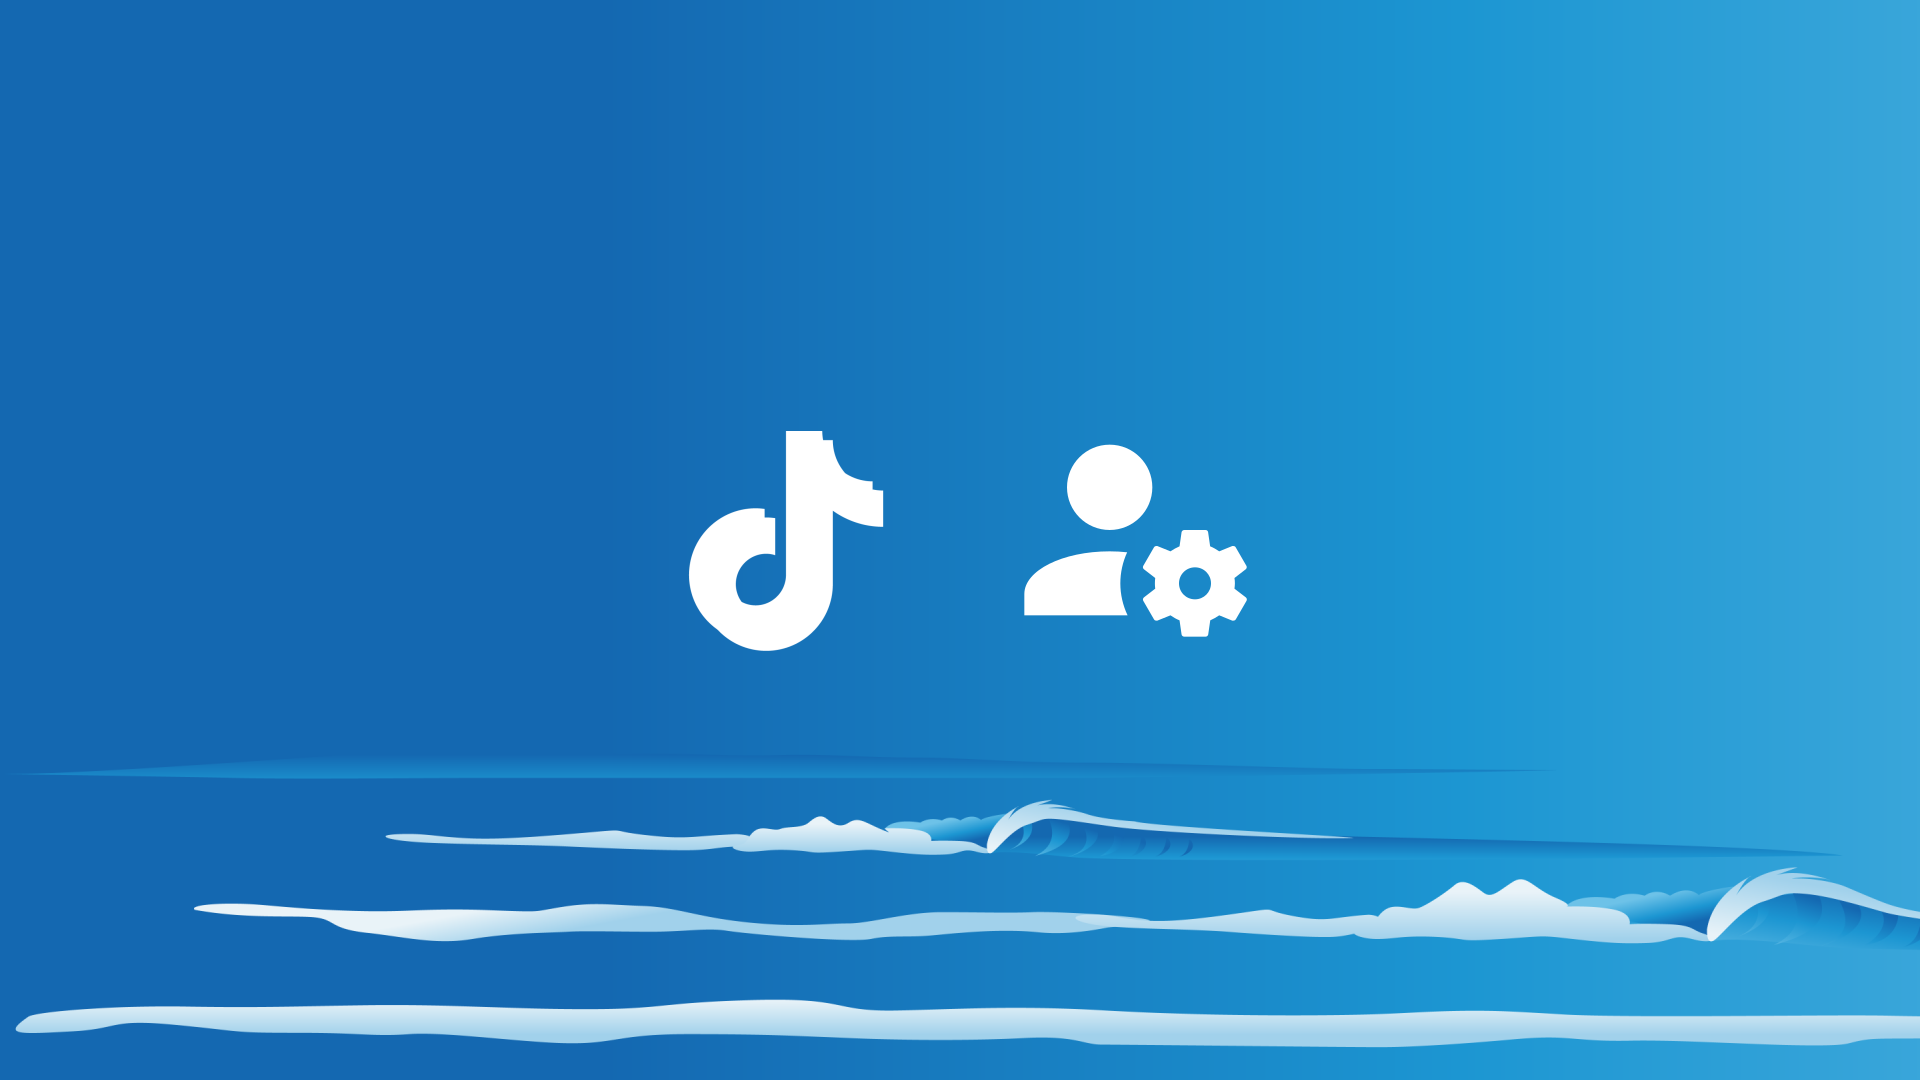 Sea background with TikTok logo and account settings icon